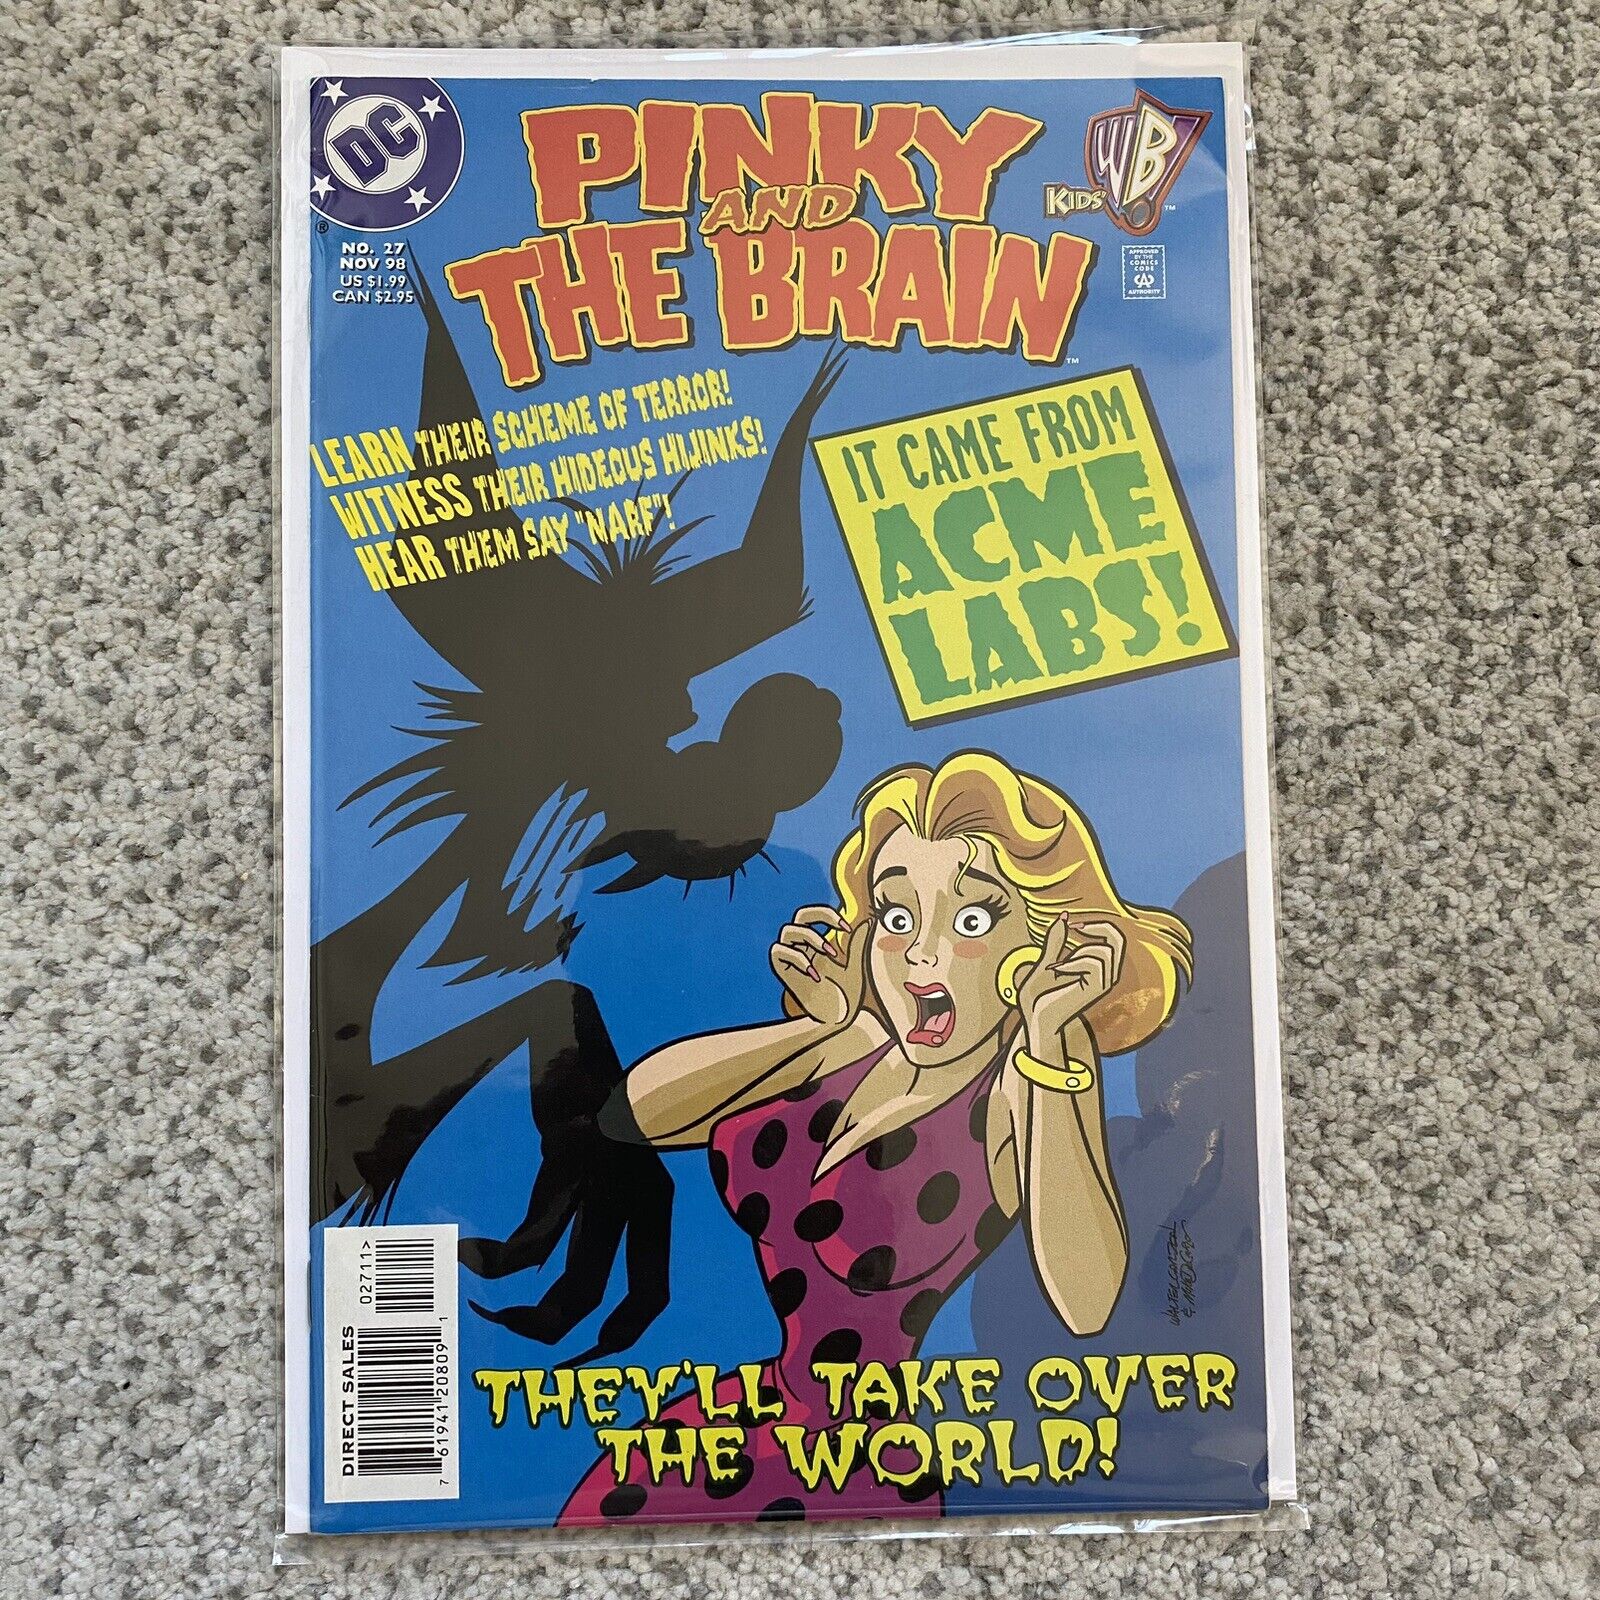 Pinky and the Brain #27 DC Comics Last Issue VF+